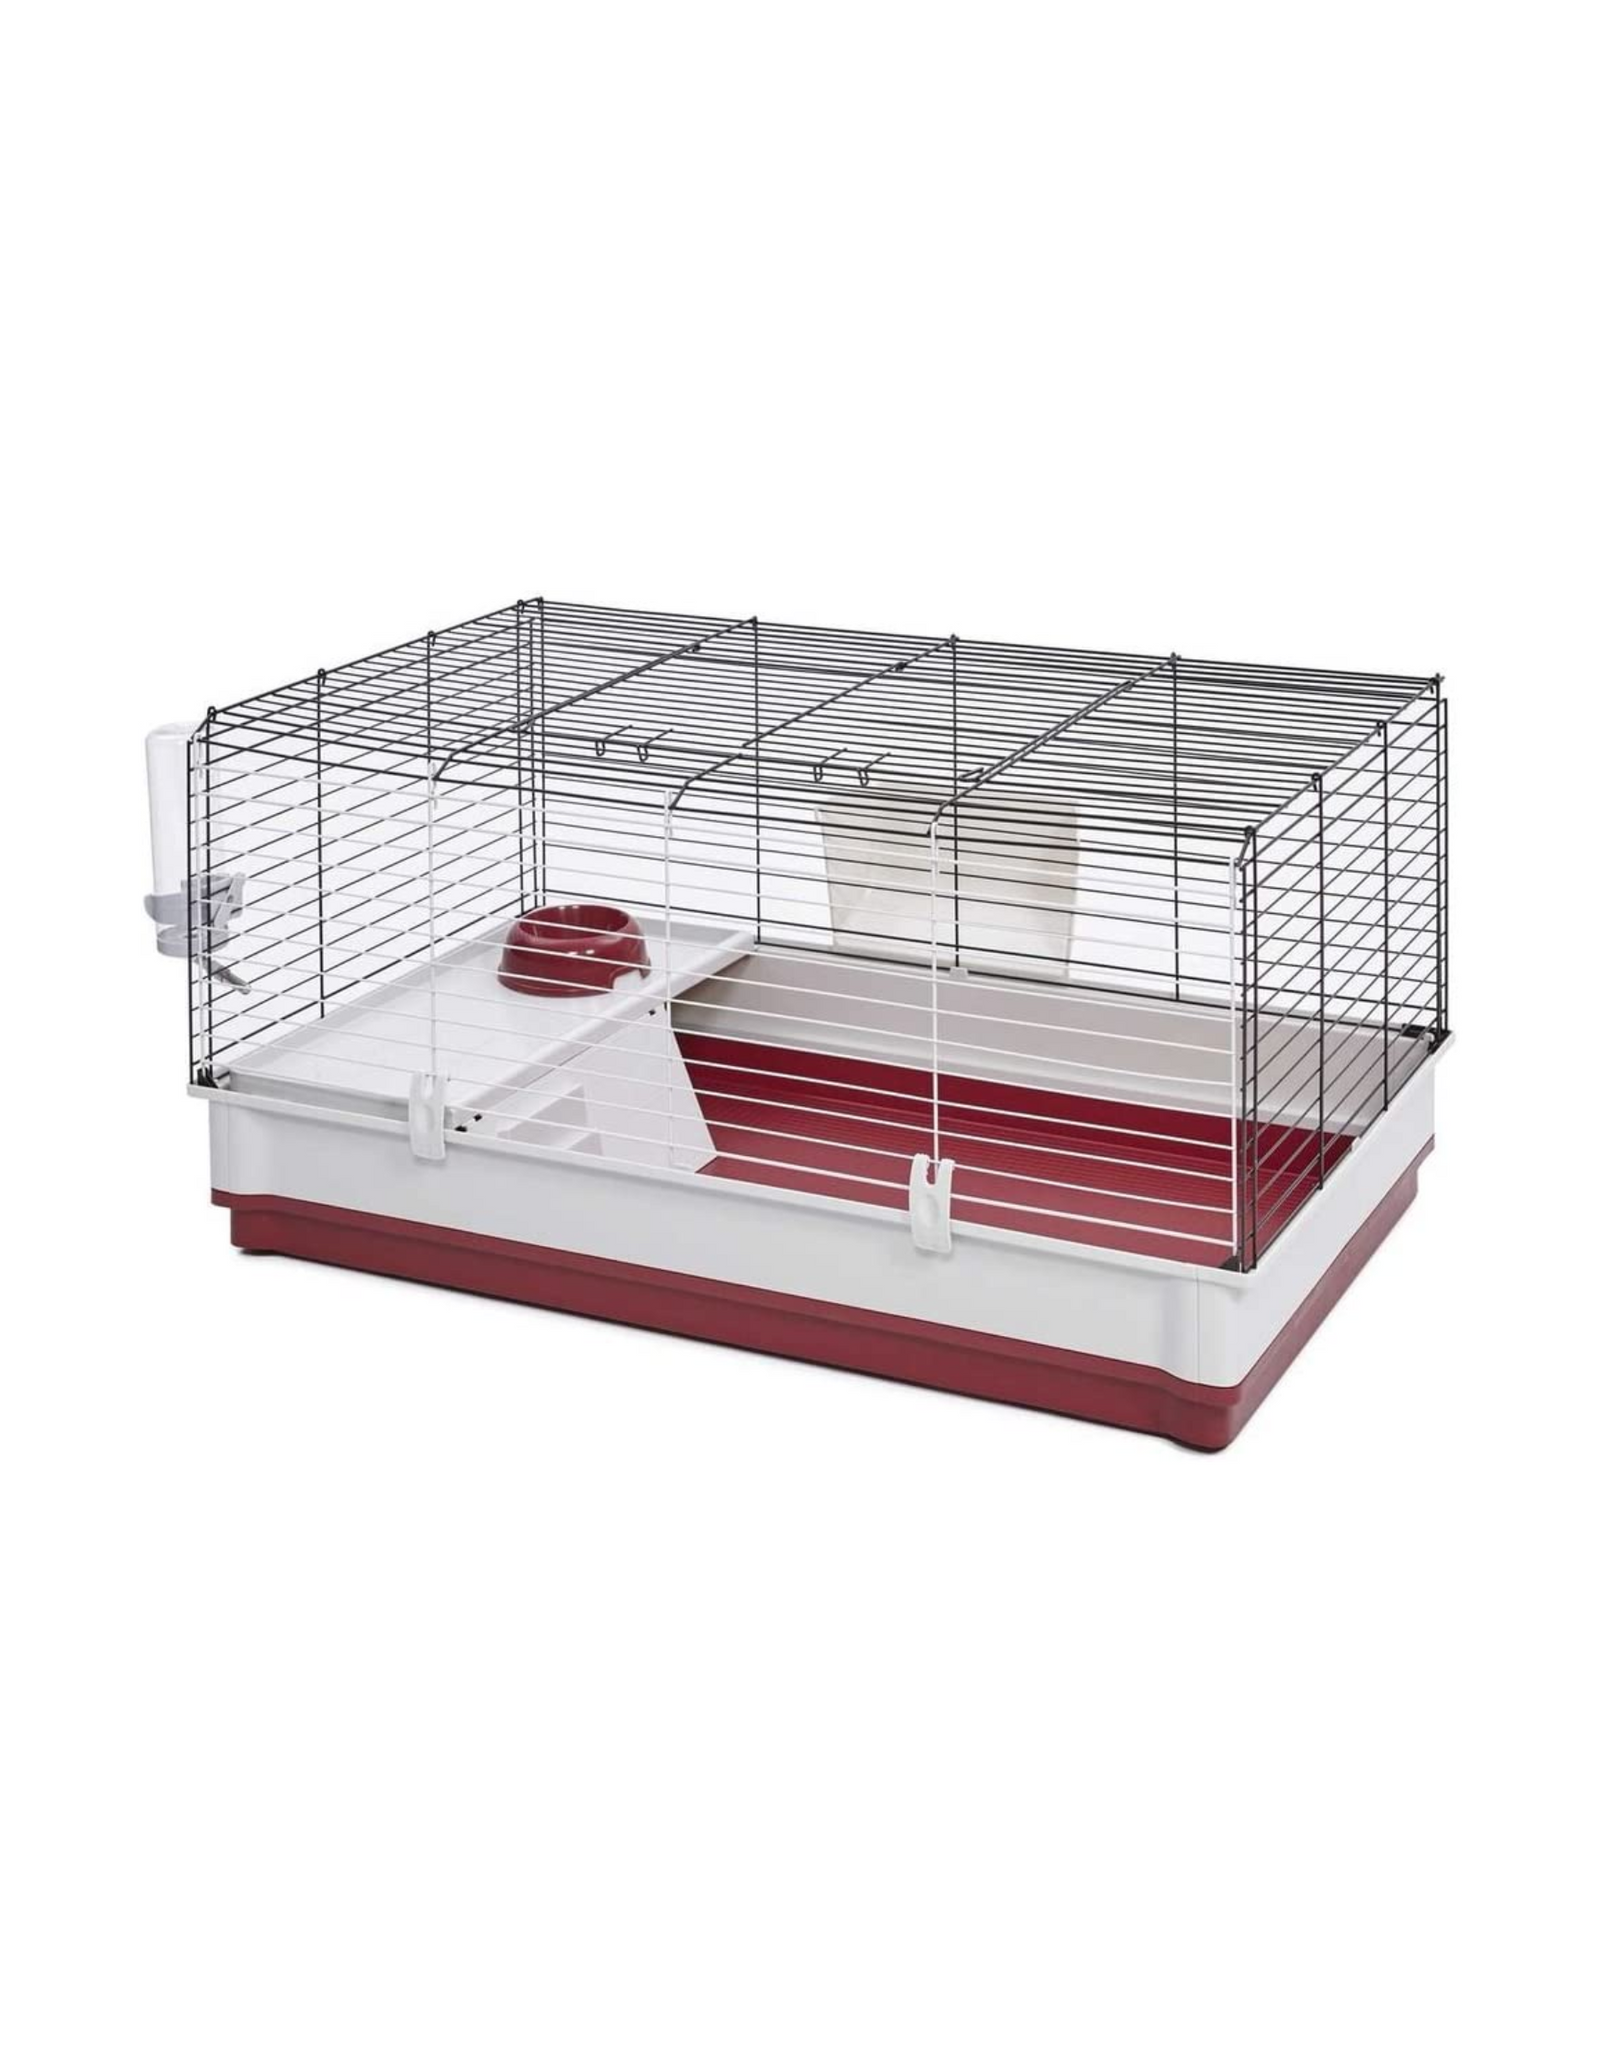 MidWest Homes for Pets 158 Wabbitat, Rabbit Cage, 39.5" L x 23.75" W x 19.75" H, Maroon and White